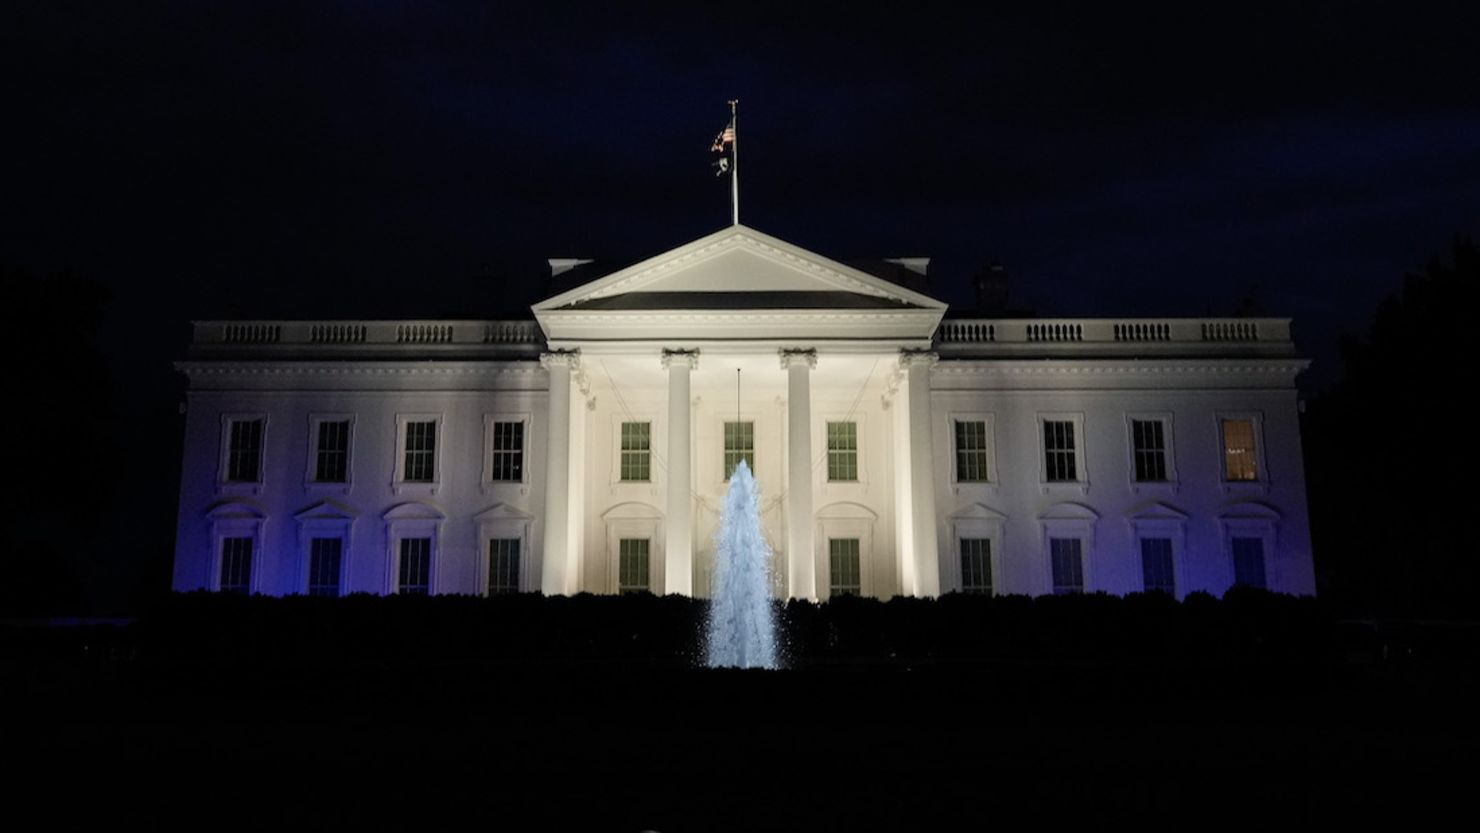 Stand With Israel, Says Biden As White House Lights Up In Blue And White